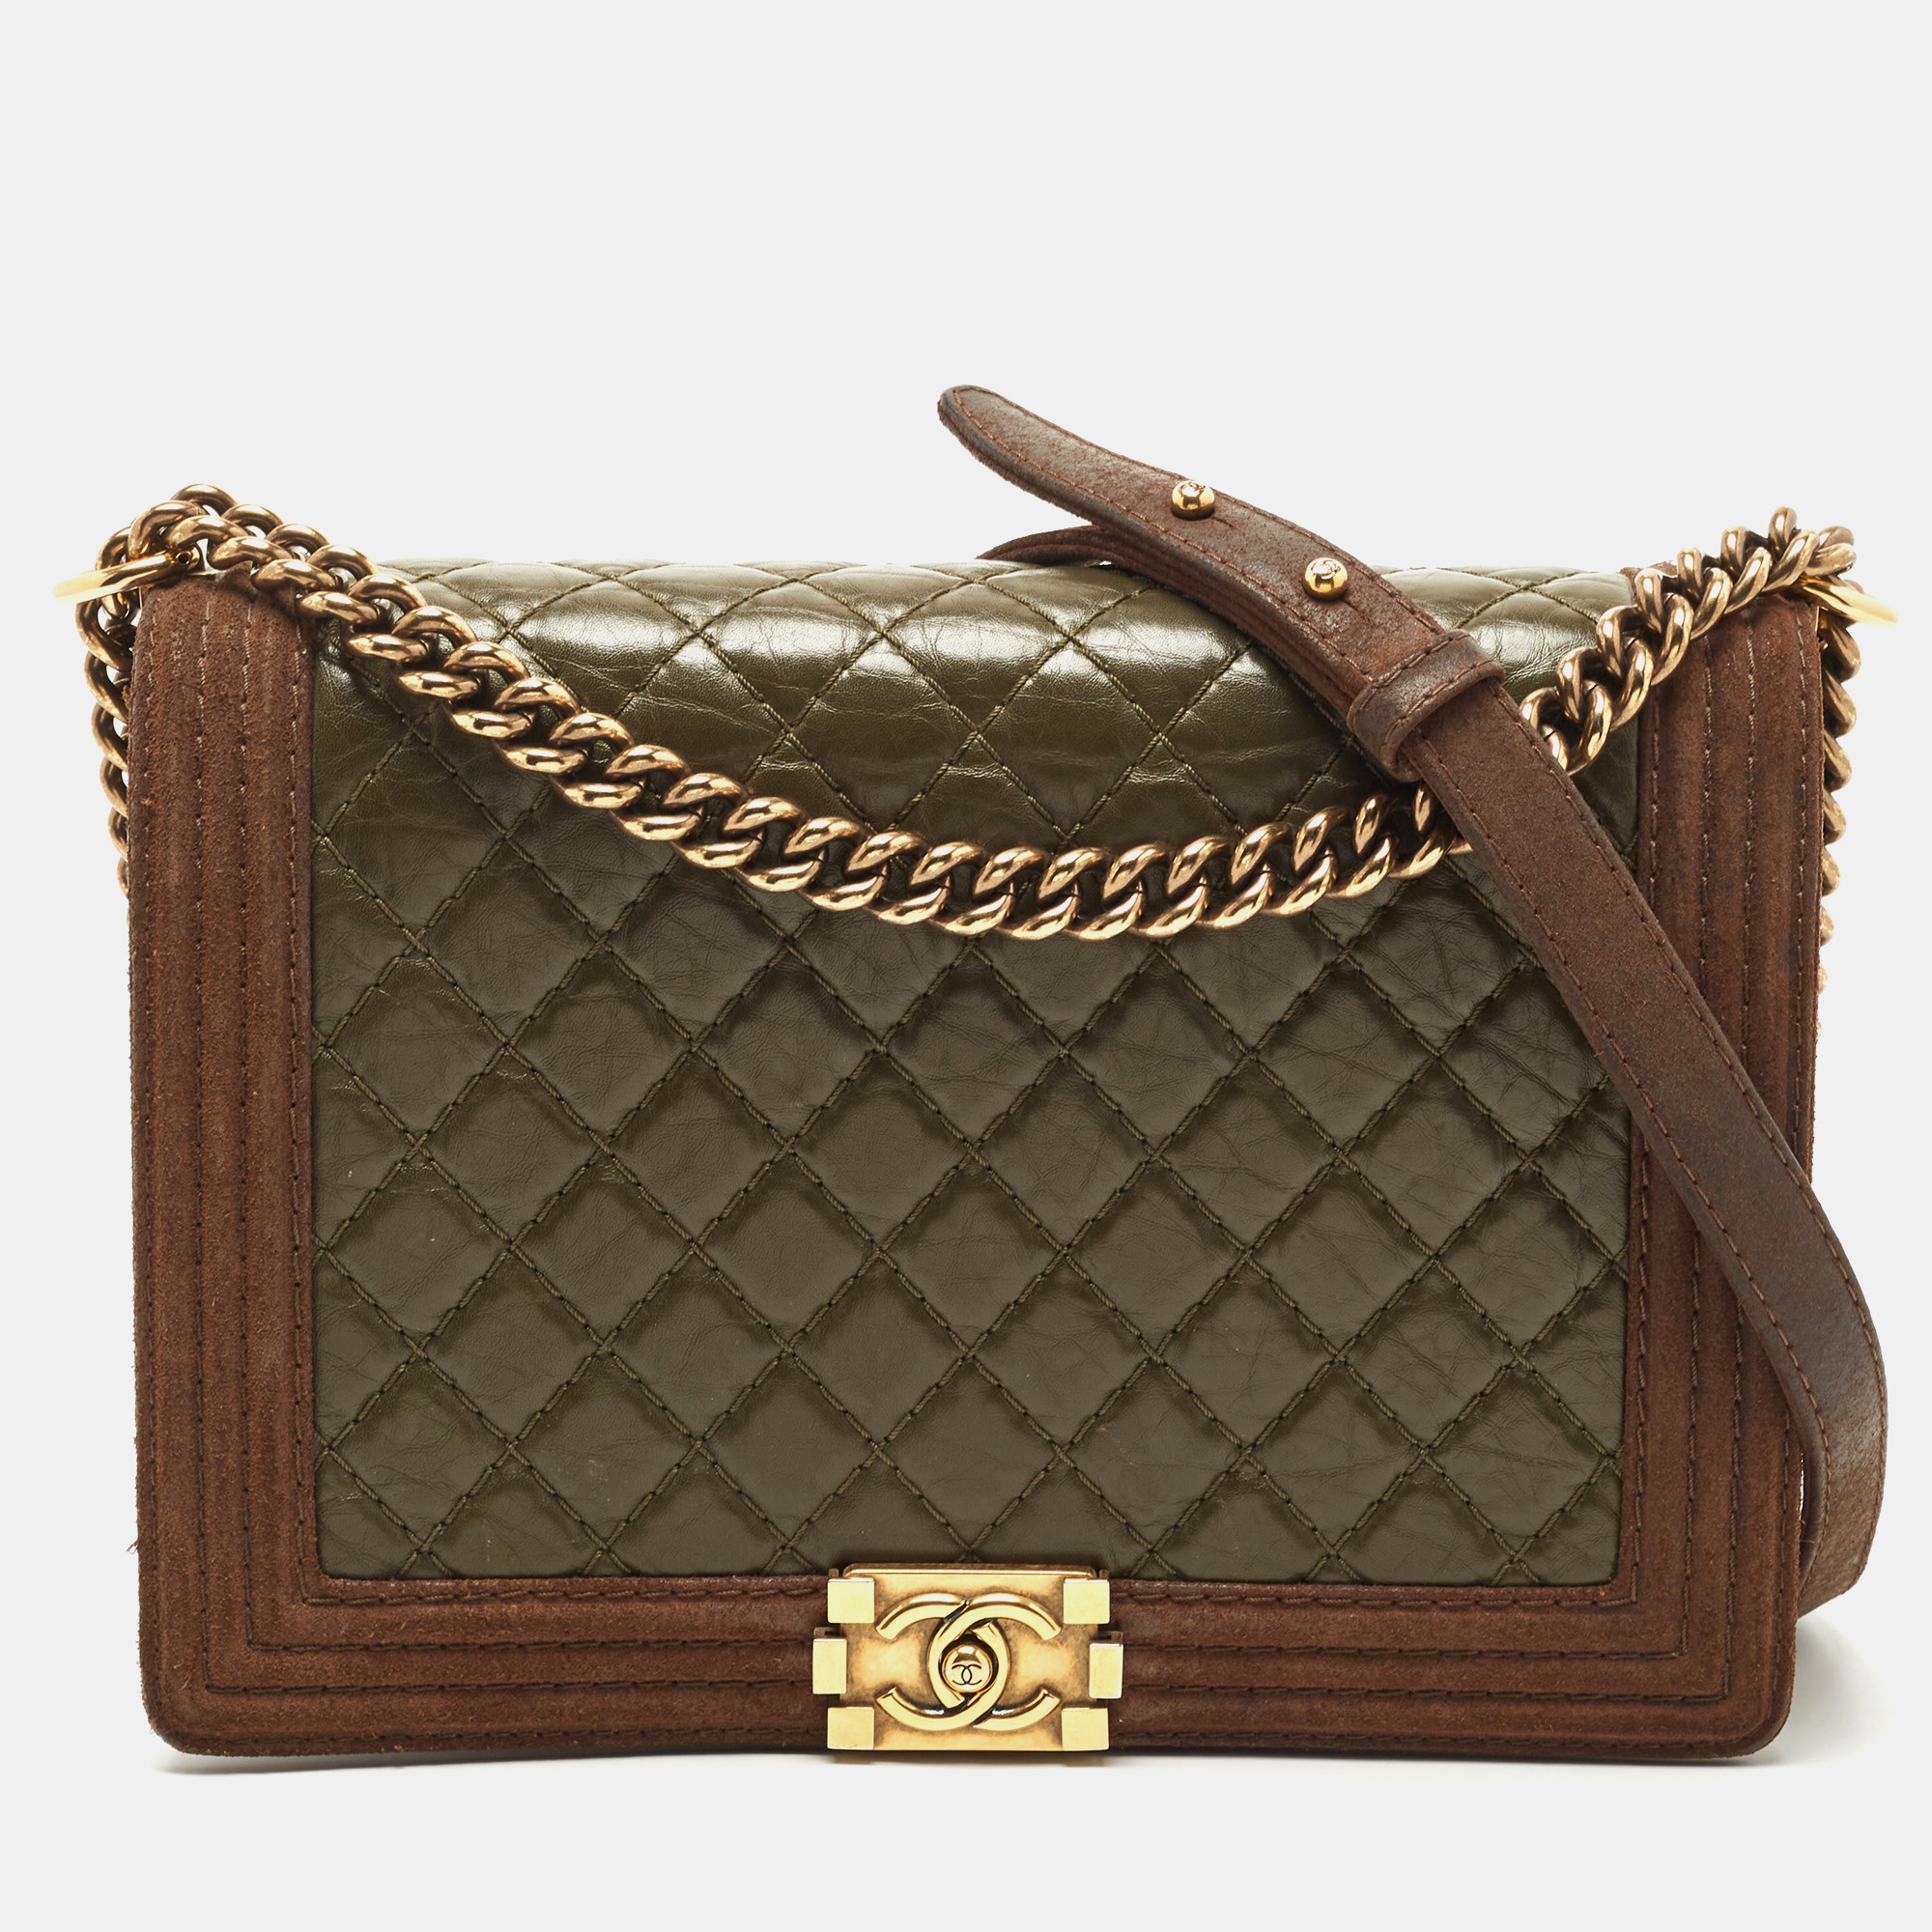 Pre-owned Chanel Brown/olive Green Quilted Leather Large Paris-edinburgh Boy Bag